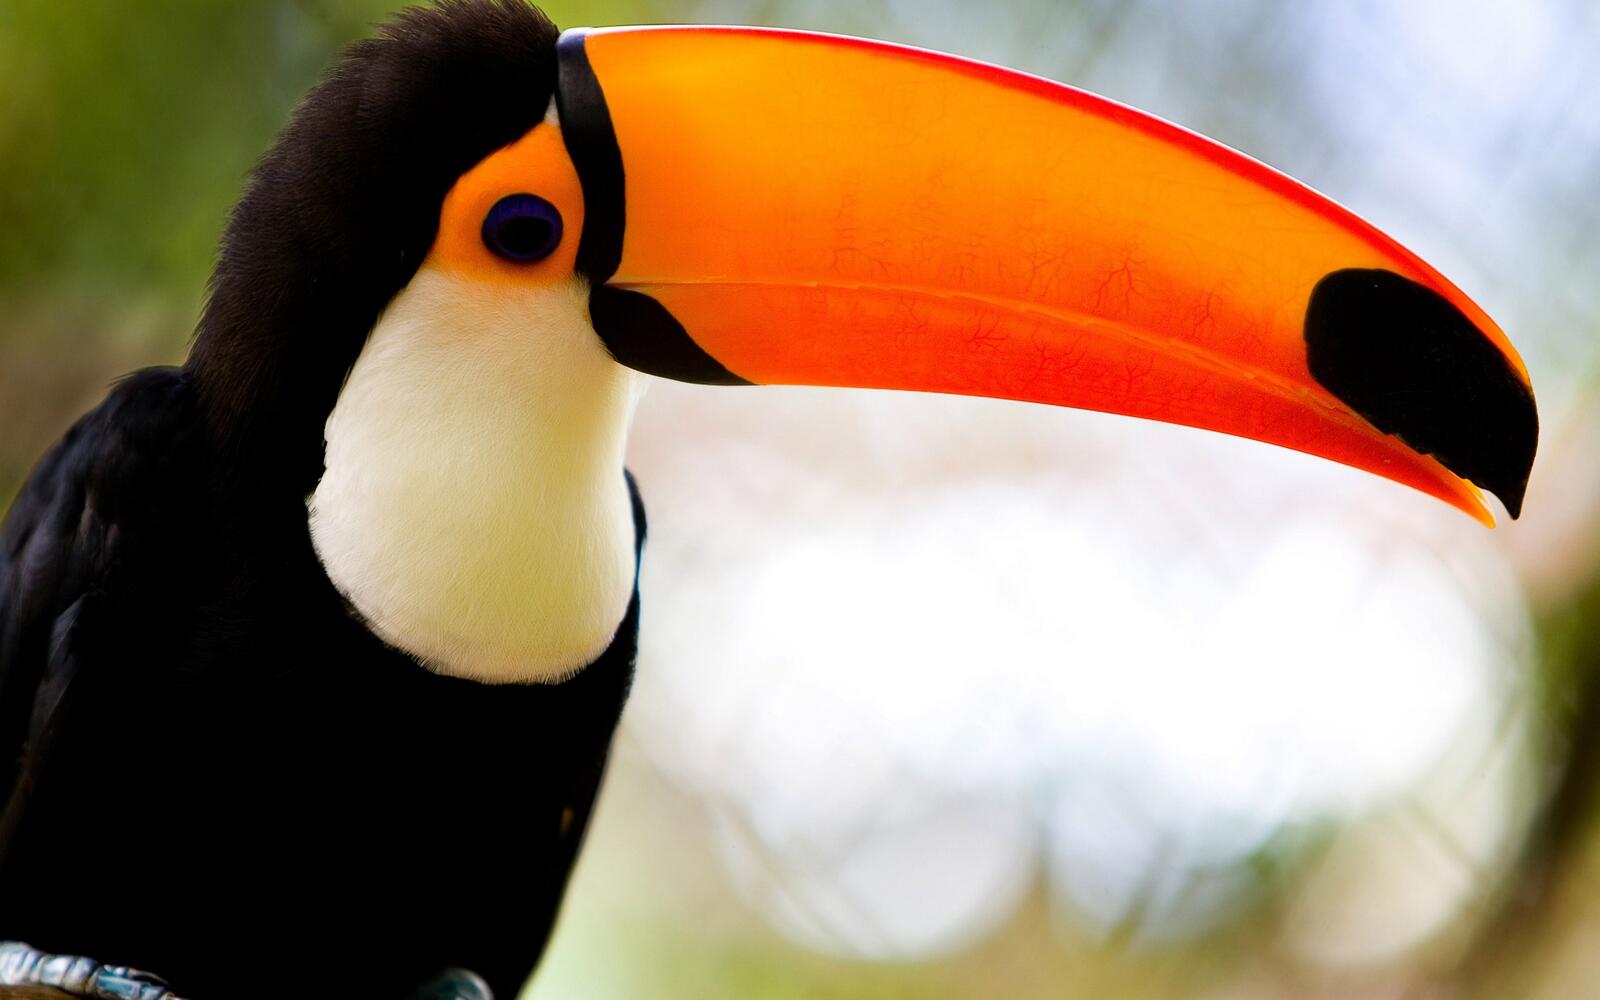 Free photo A close-up view of a toucan from the side